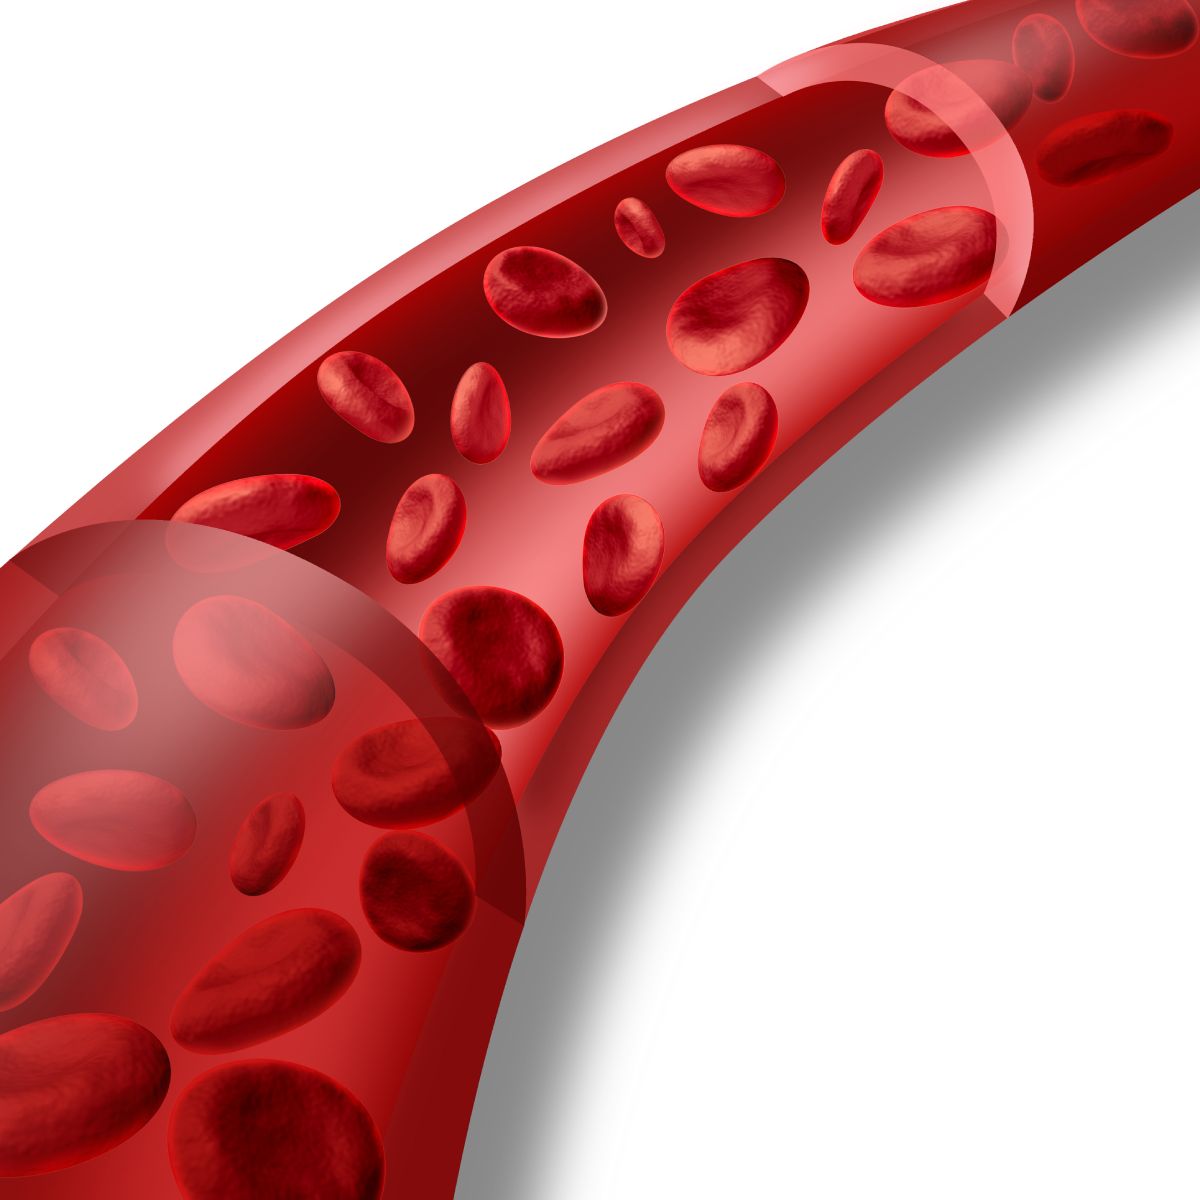 Haematology and Biochemistry: The Two Pillars of Blood Analysis